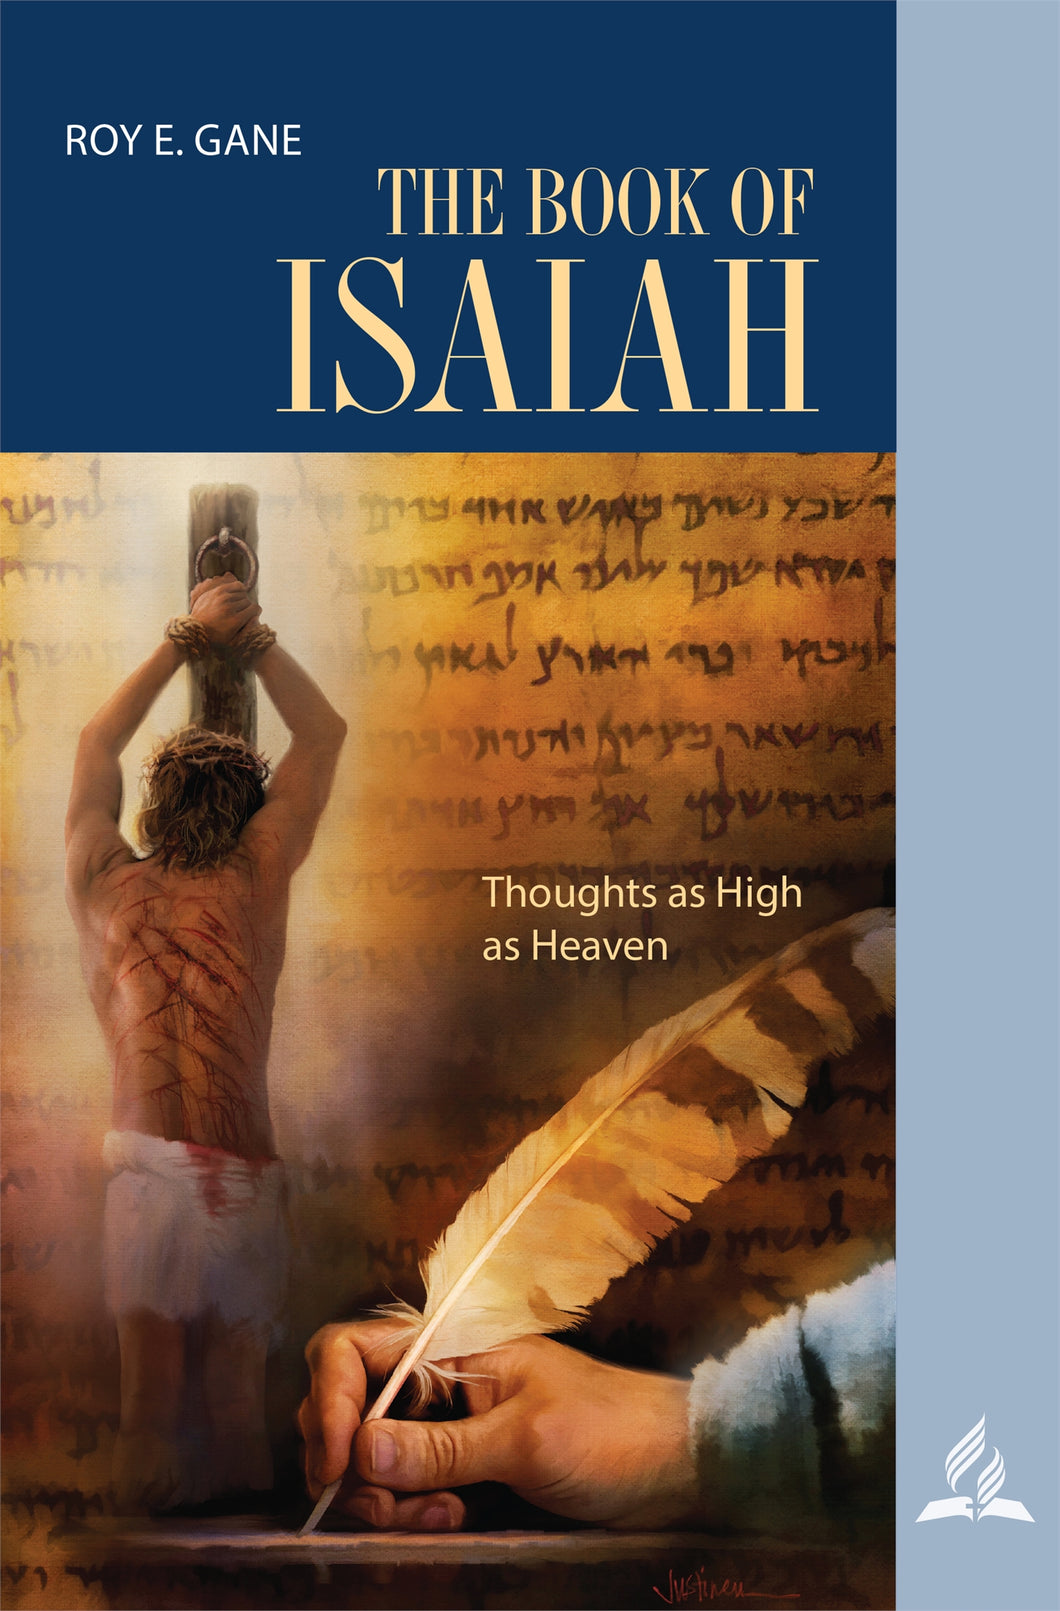 The Book of Isaiah (1st Qtr 2021 Quarterly Helps Book)